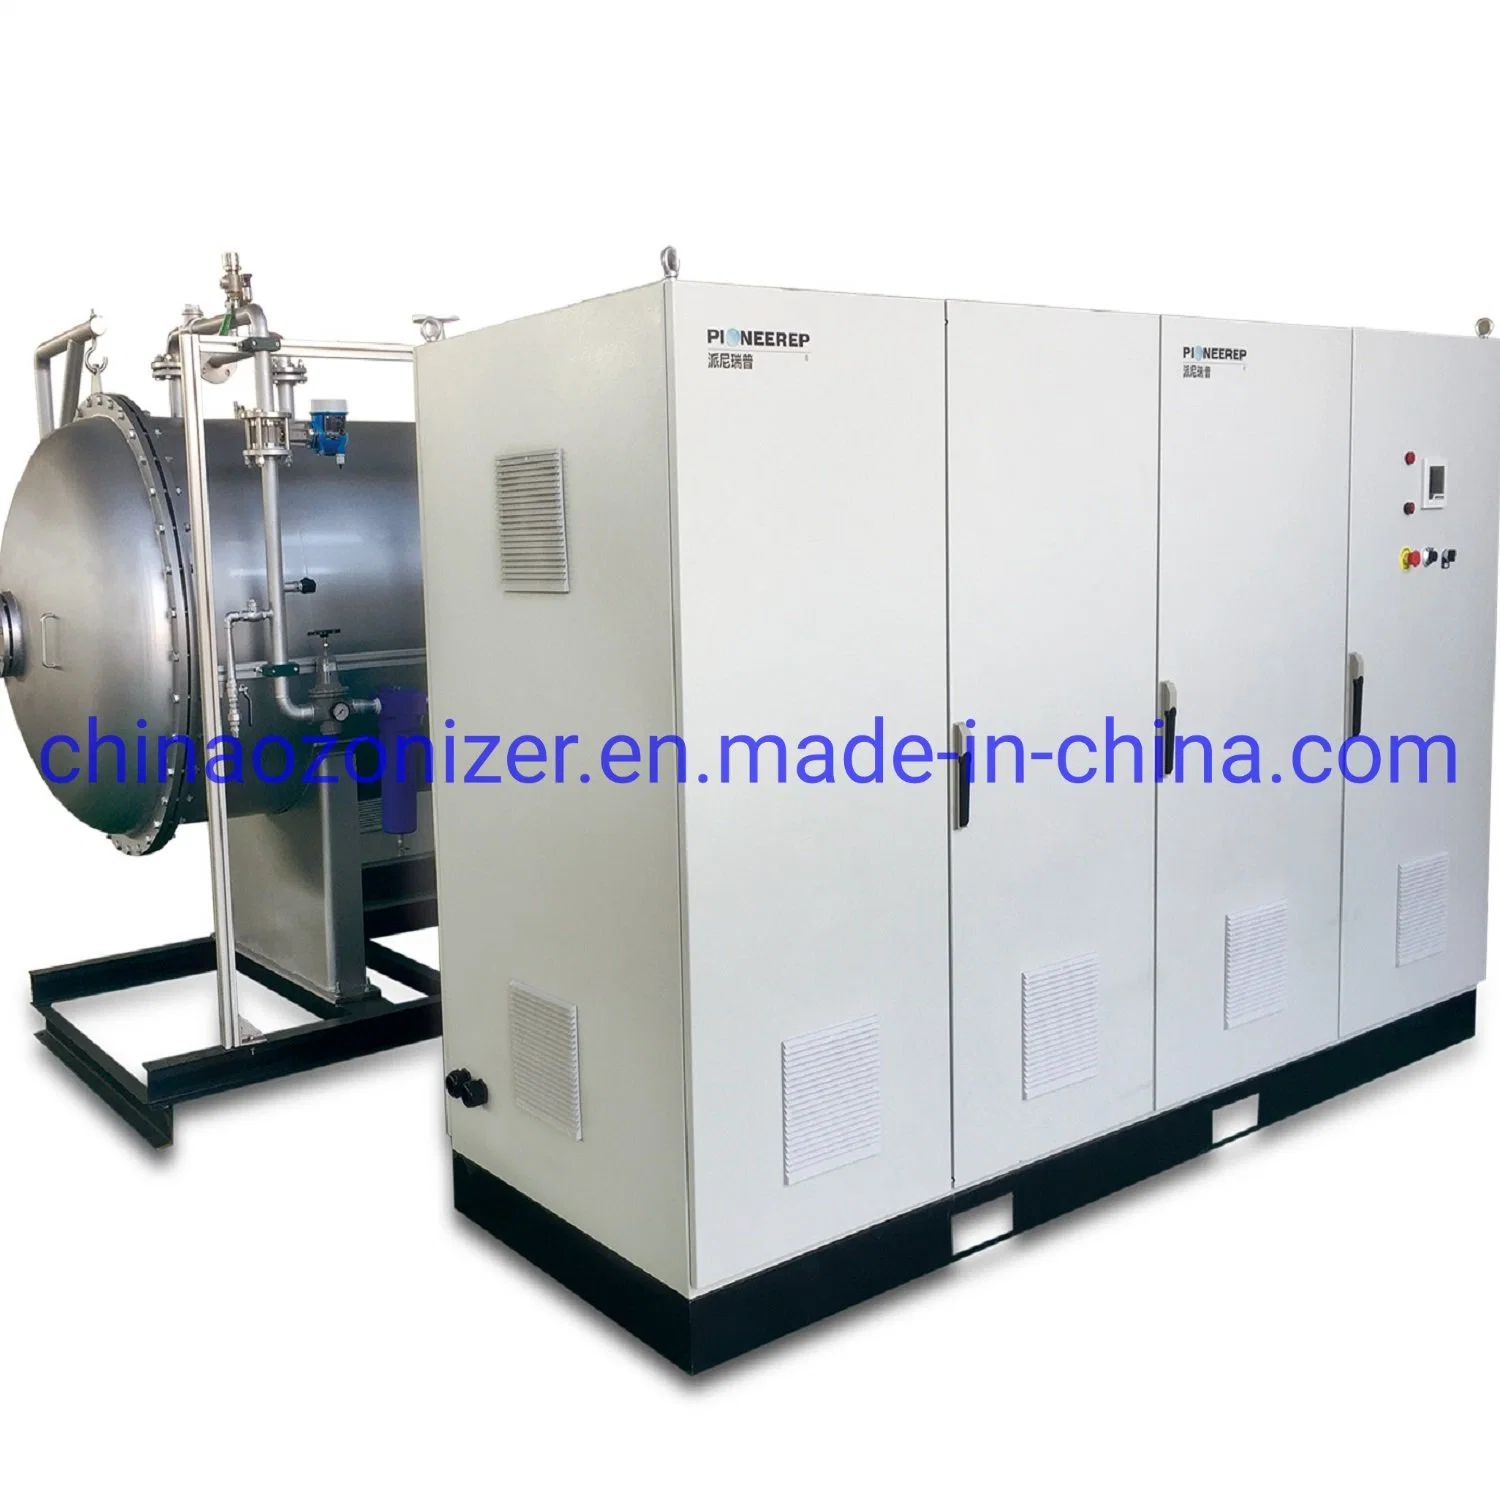 Air Source and Oxygen Source 5-10kg/H Ozonizer for Farm Feeding Water, Beverage Plant, Industrial Wastewater Treatment